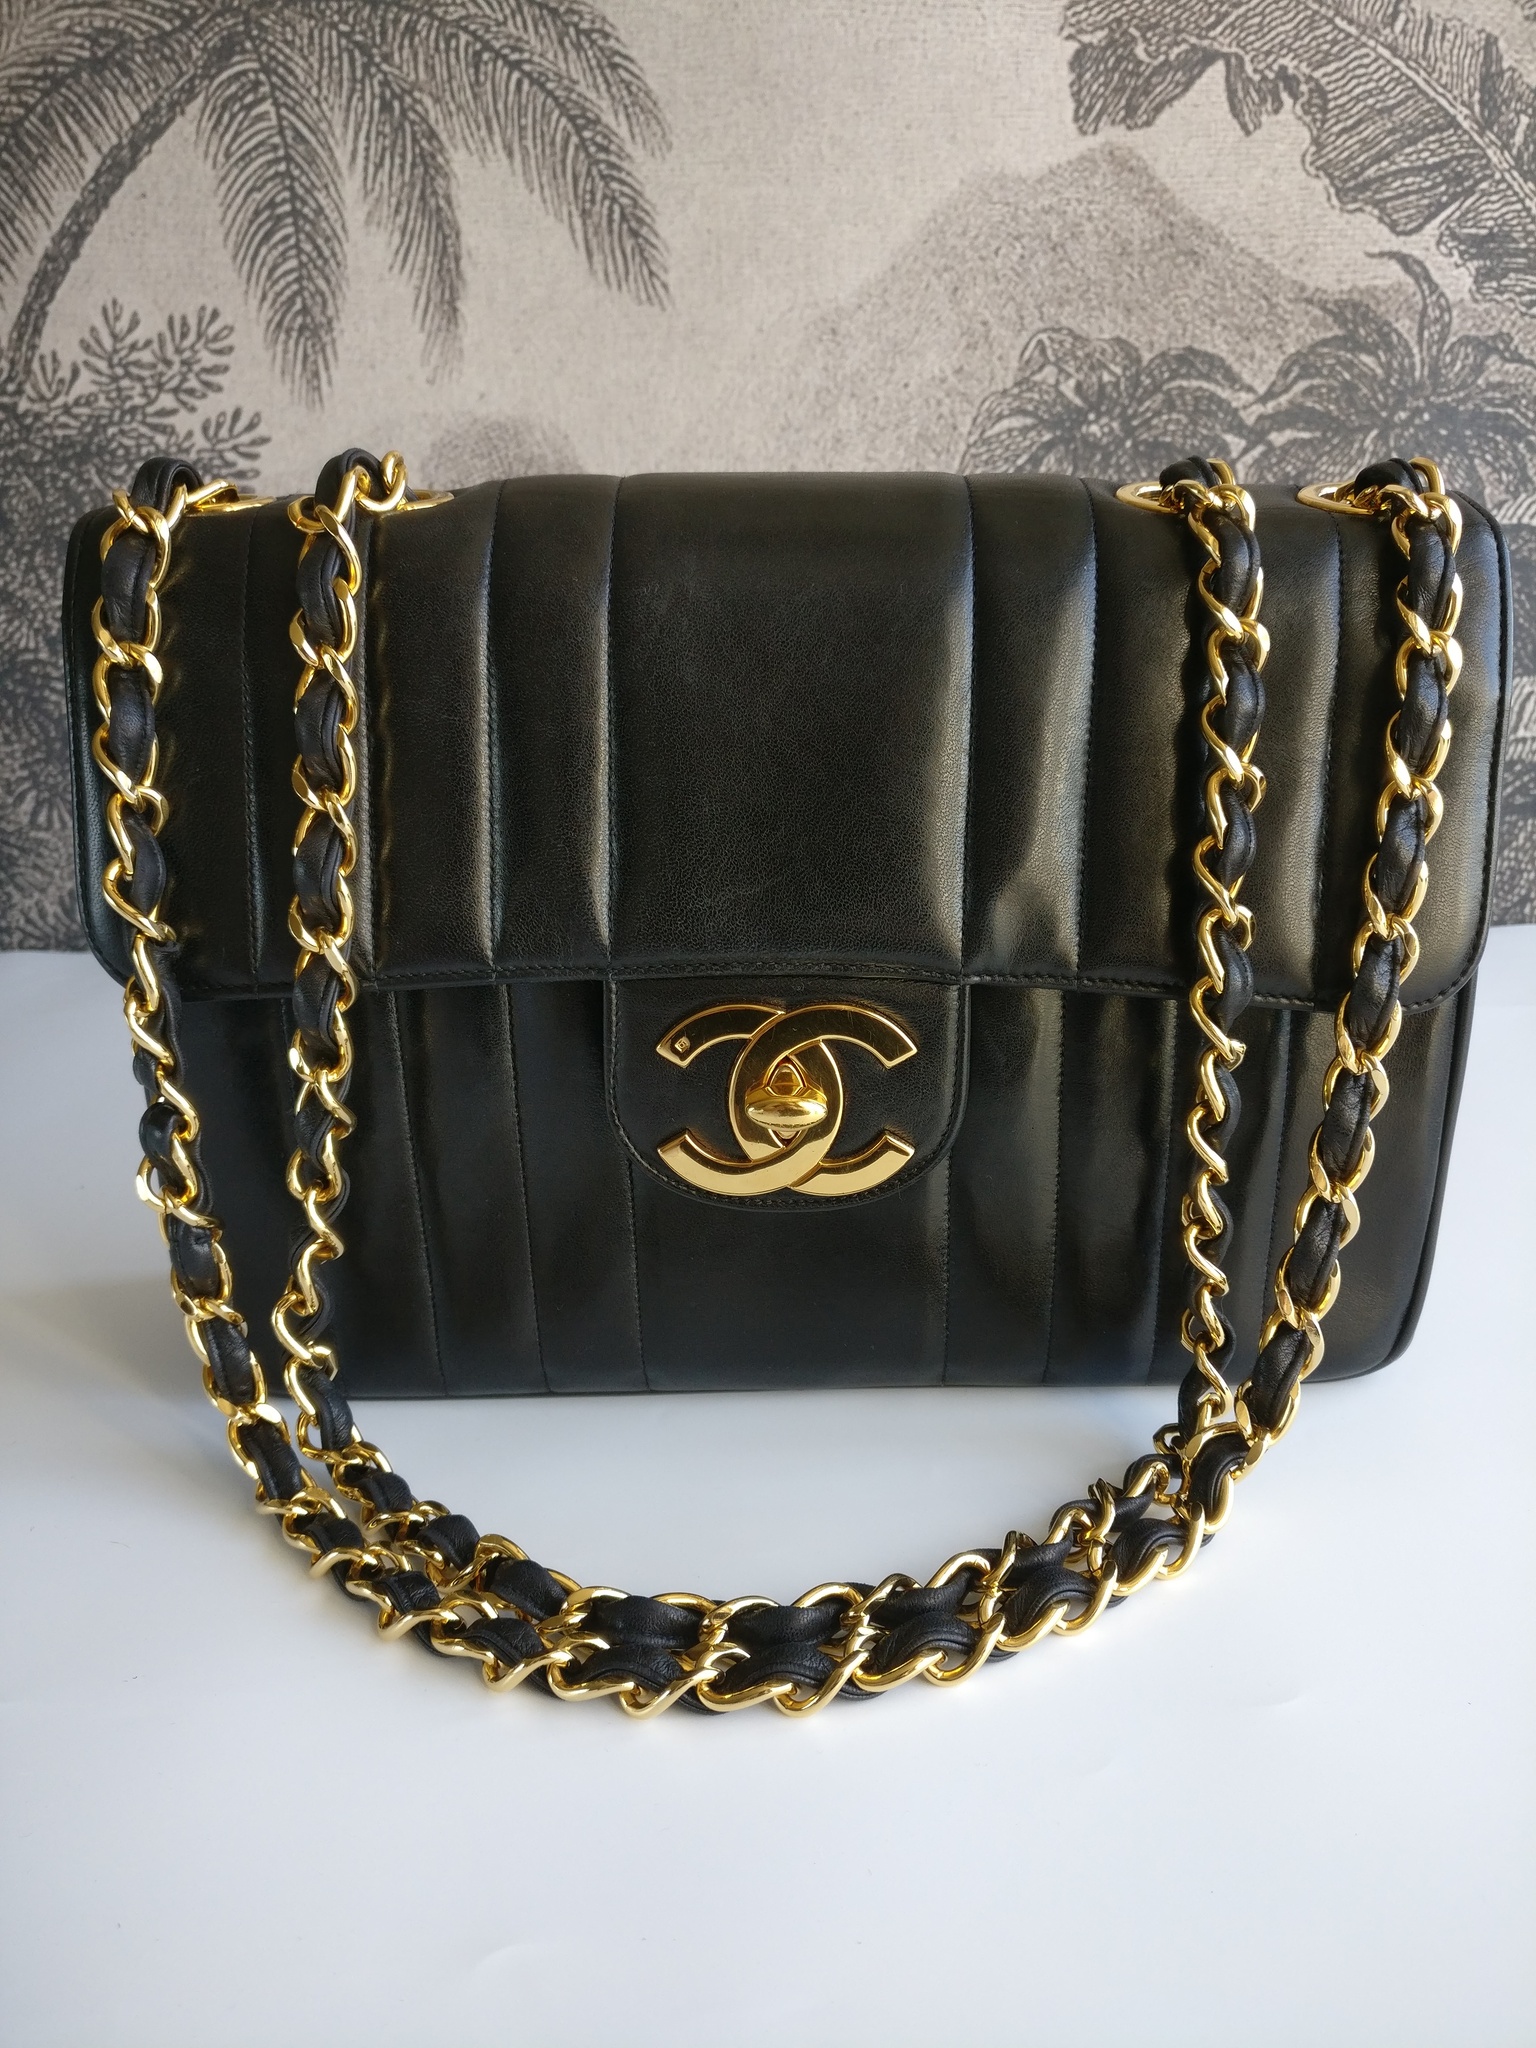 BUY Preowned Chanel Large Double Flap Black Caviar Bag